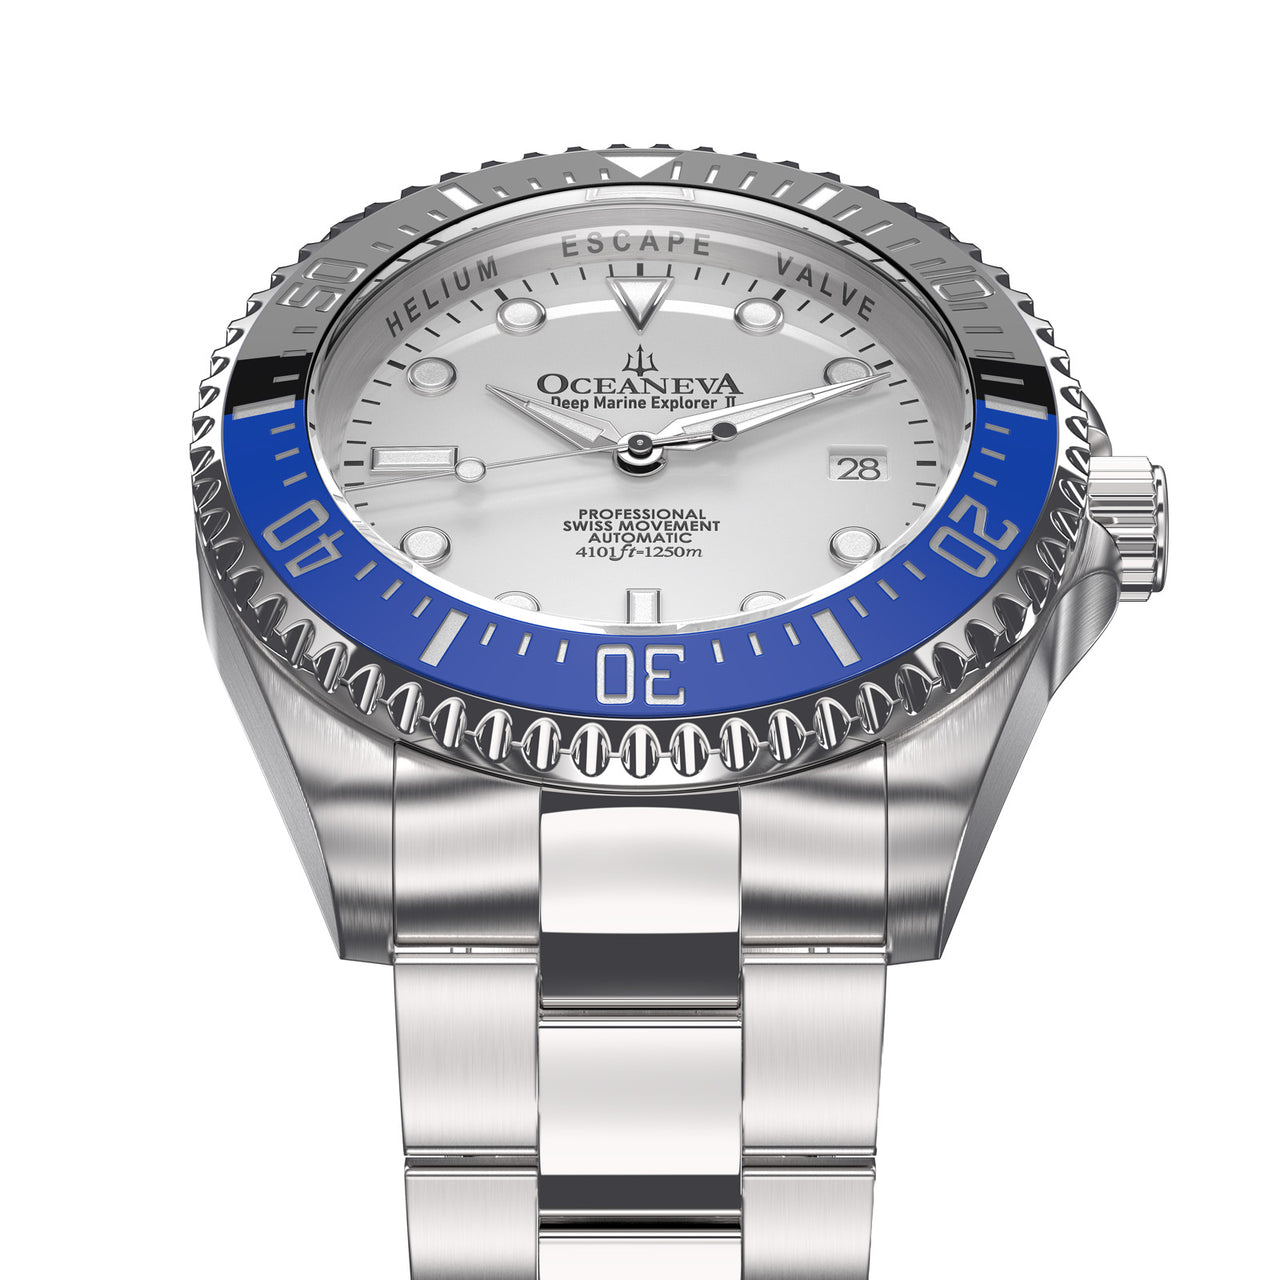 Oceaneva 1250M Dive Watch Blue/Black Bezel White Dial Frontal View Picture